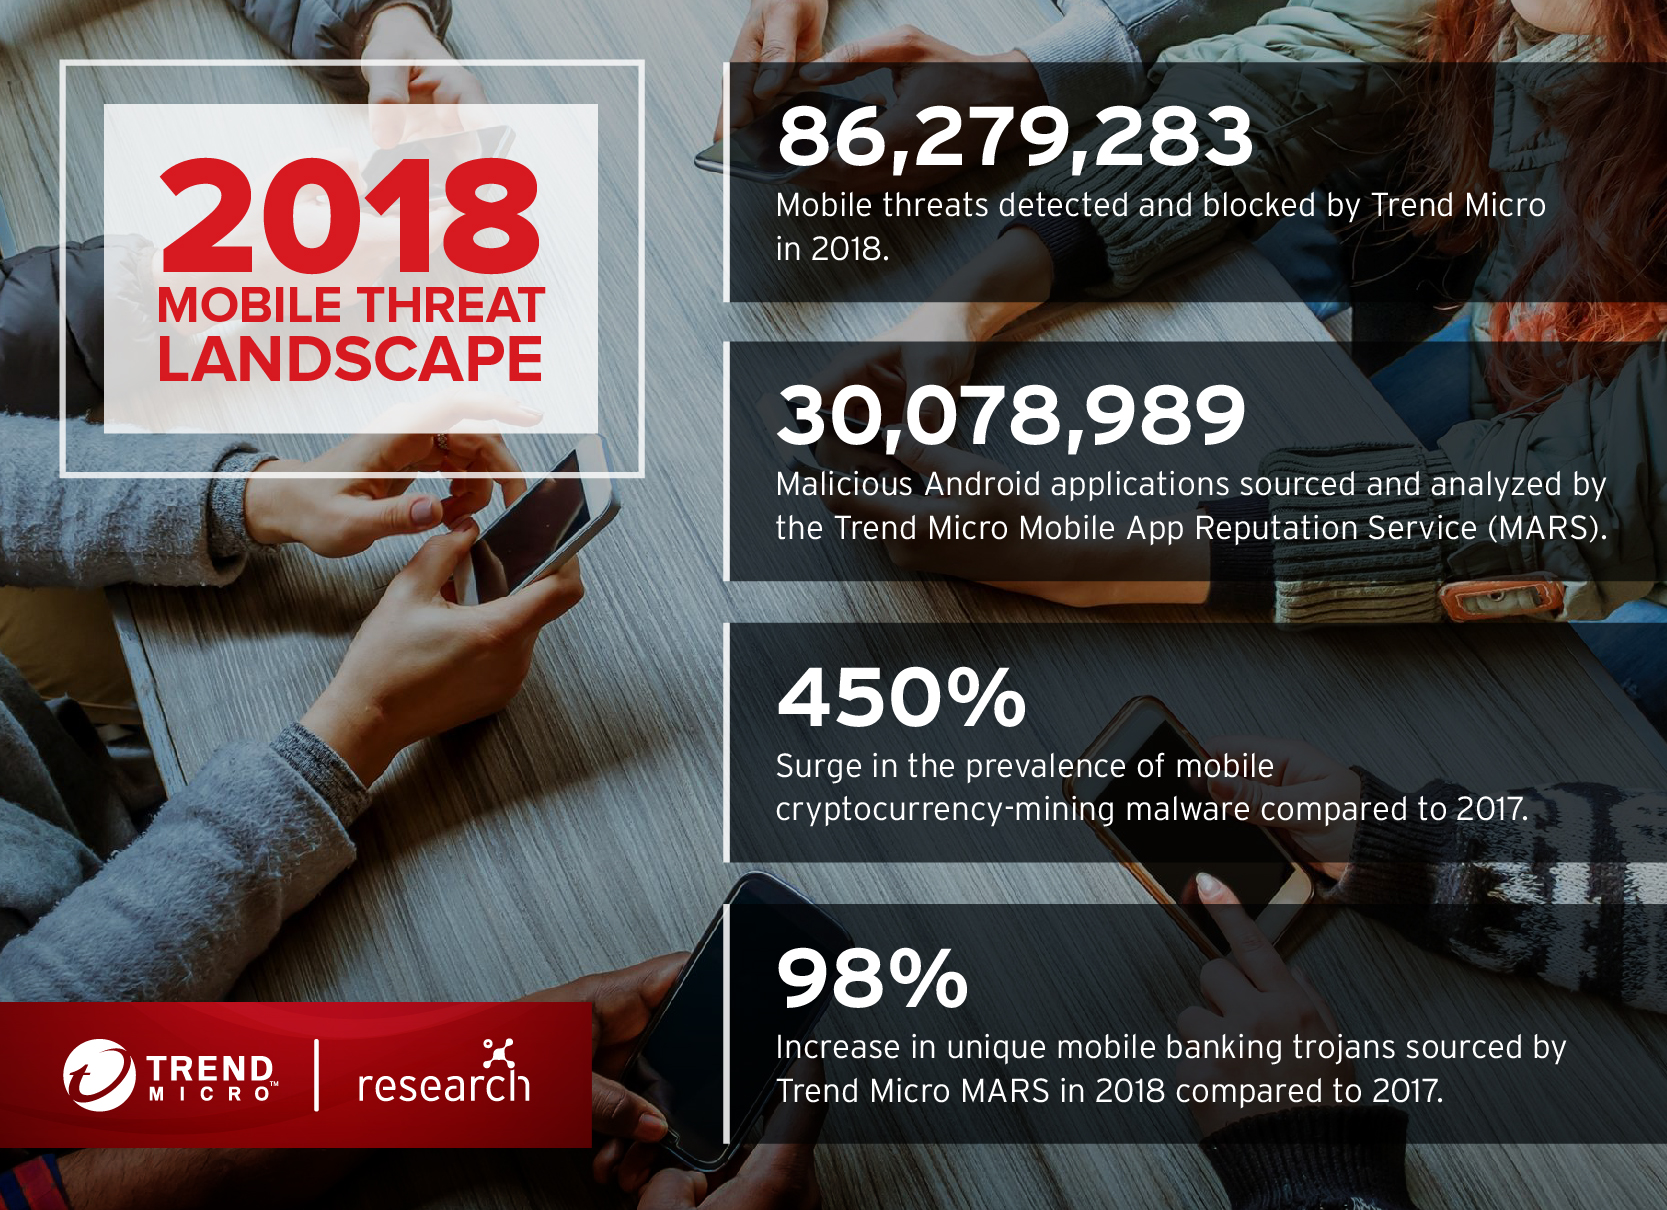 https://documents.trendmicro.com/images/TEx/articles/by-the-numbers-2018-mobile-threat-landscape-2.jpg